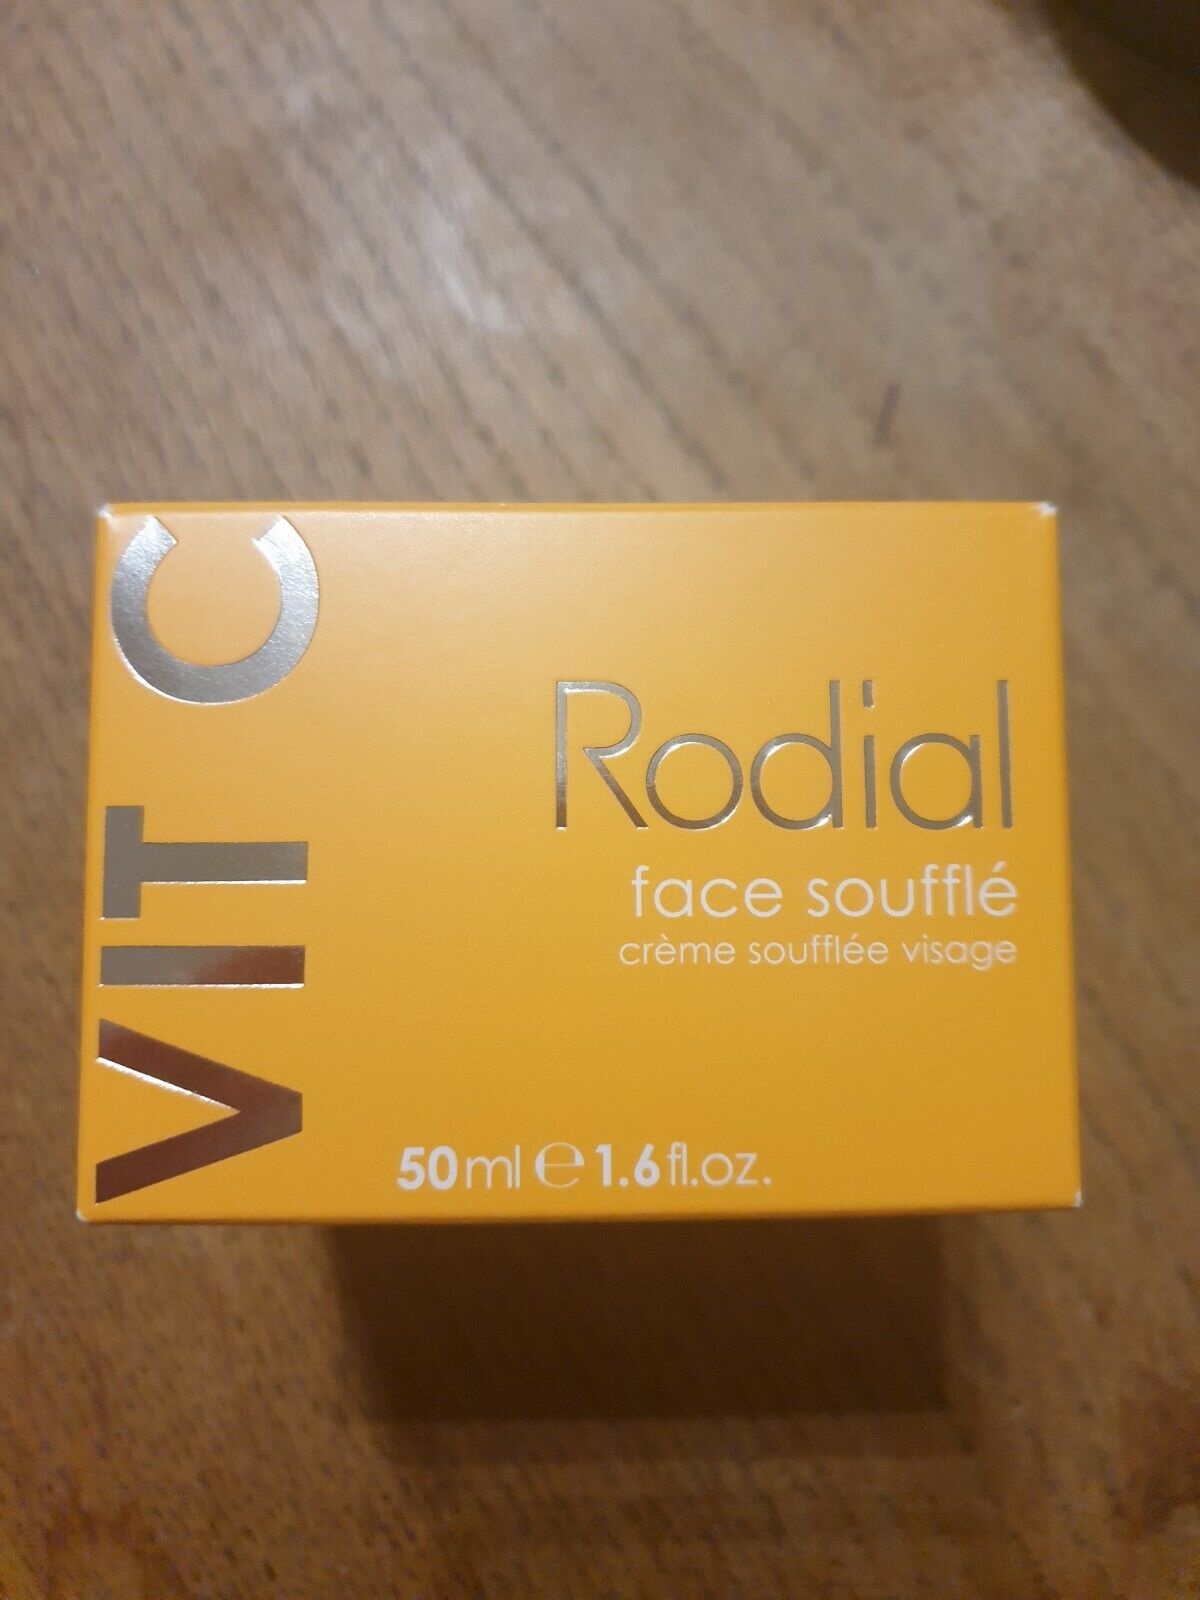 Rodial Vit Vitamin C Face £85 RRP 50ml Max 66% OFF NEW Shipping included Souffle